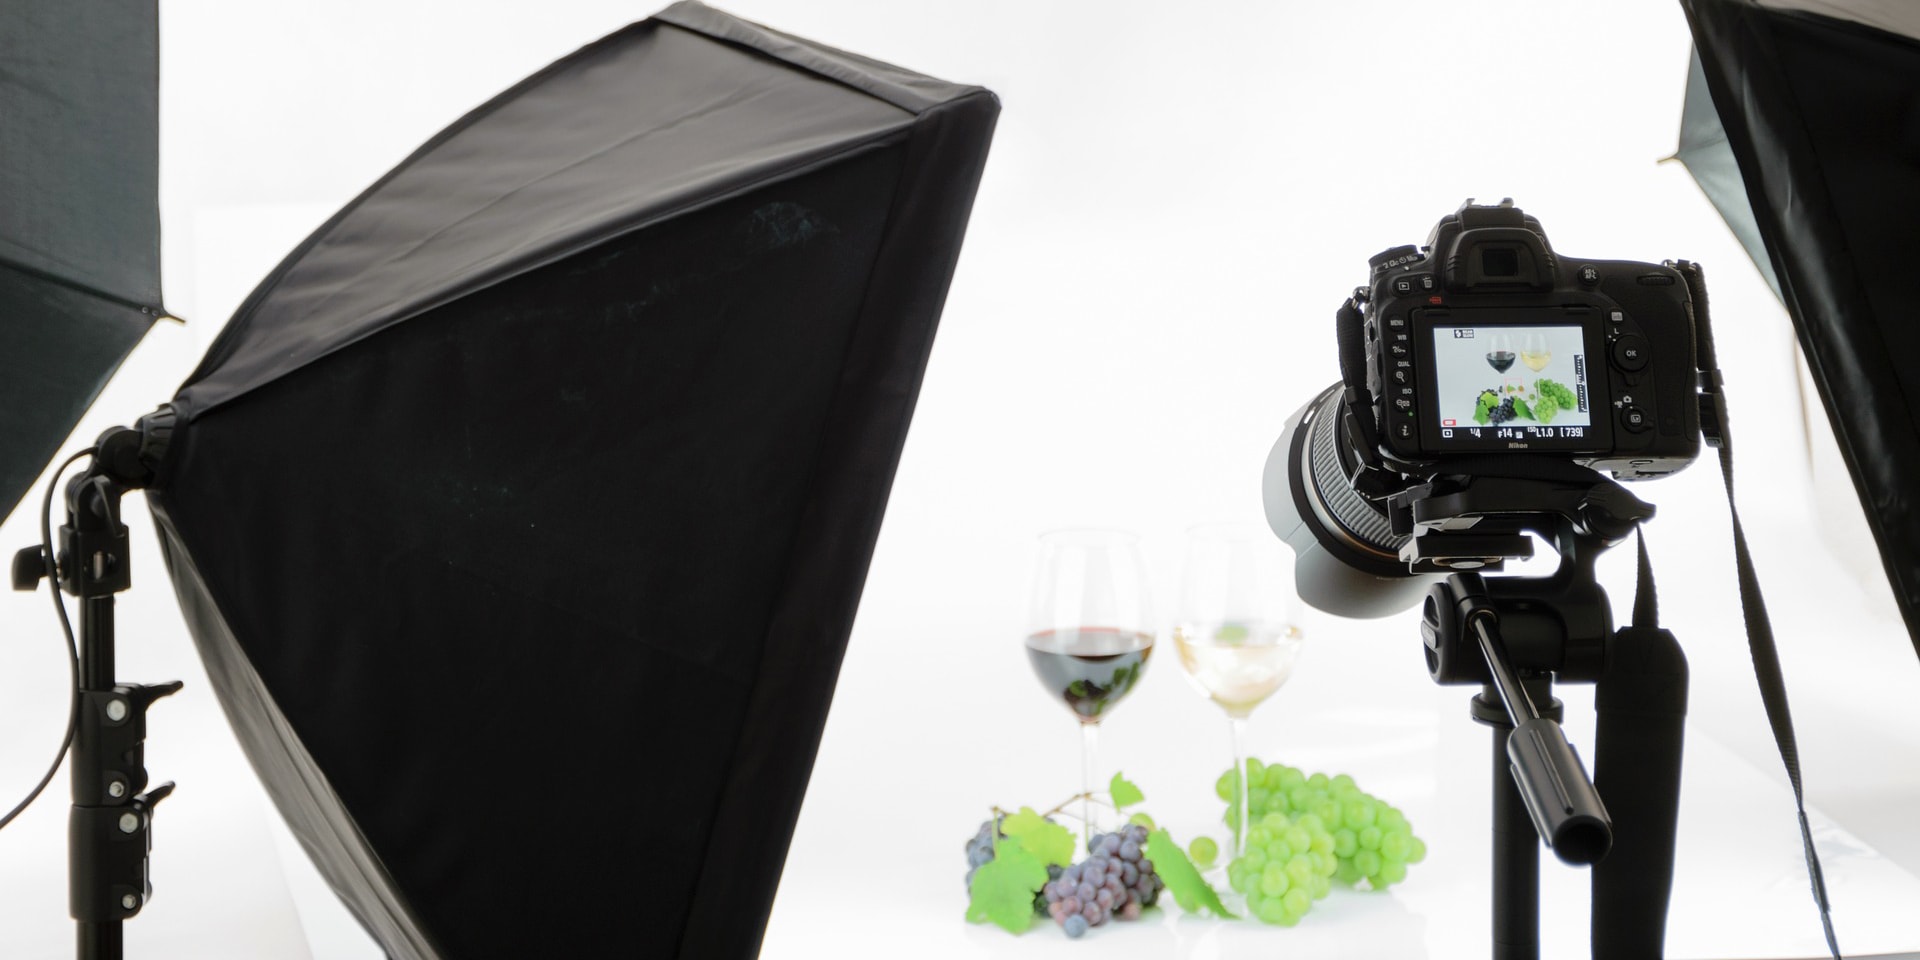 10 Best Product Photography Tips to Grow Your Career in 2023